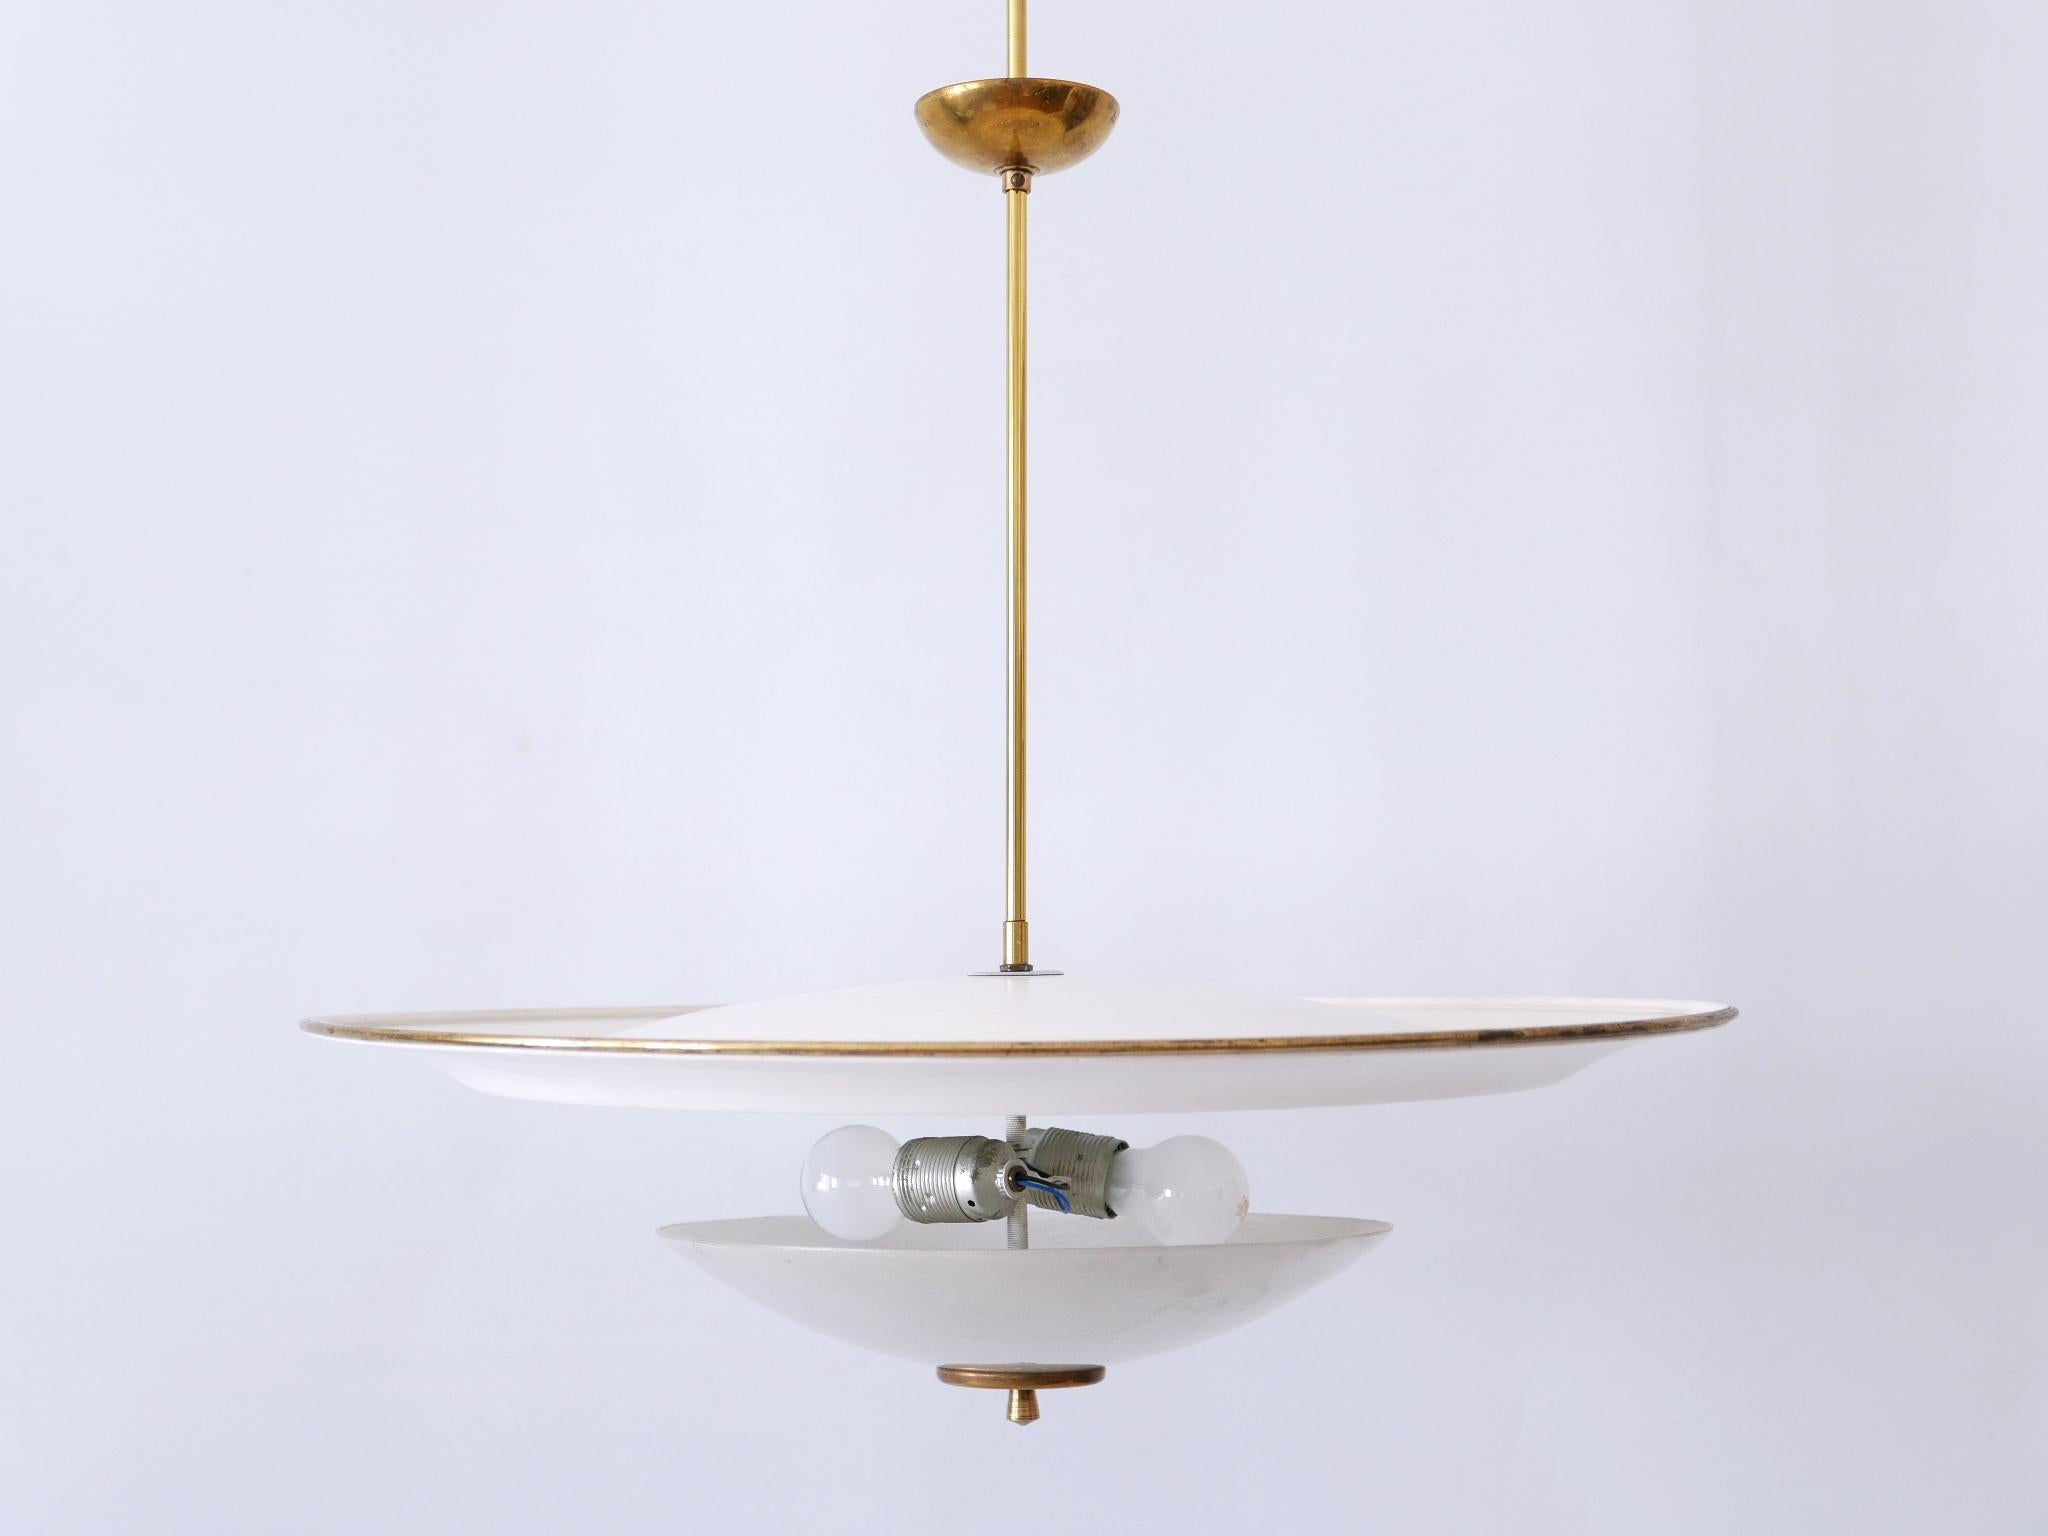 Large Mid-Century Modern 'Ufo' Ceiling Light or Pendant Lamp Germany 1950s № 2 For Sale 2